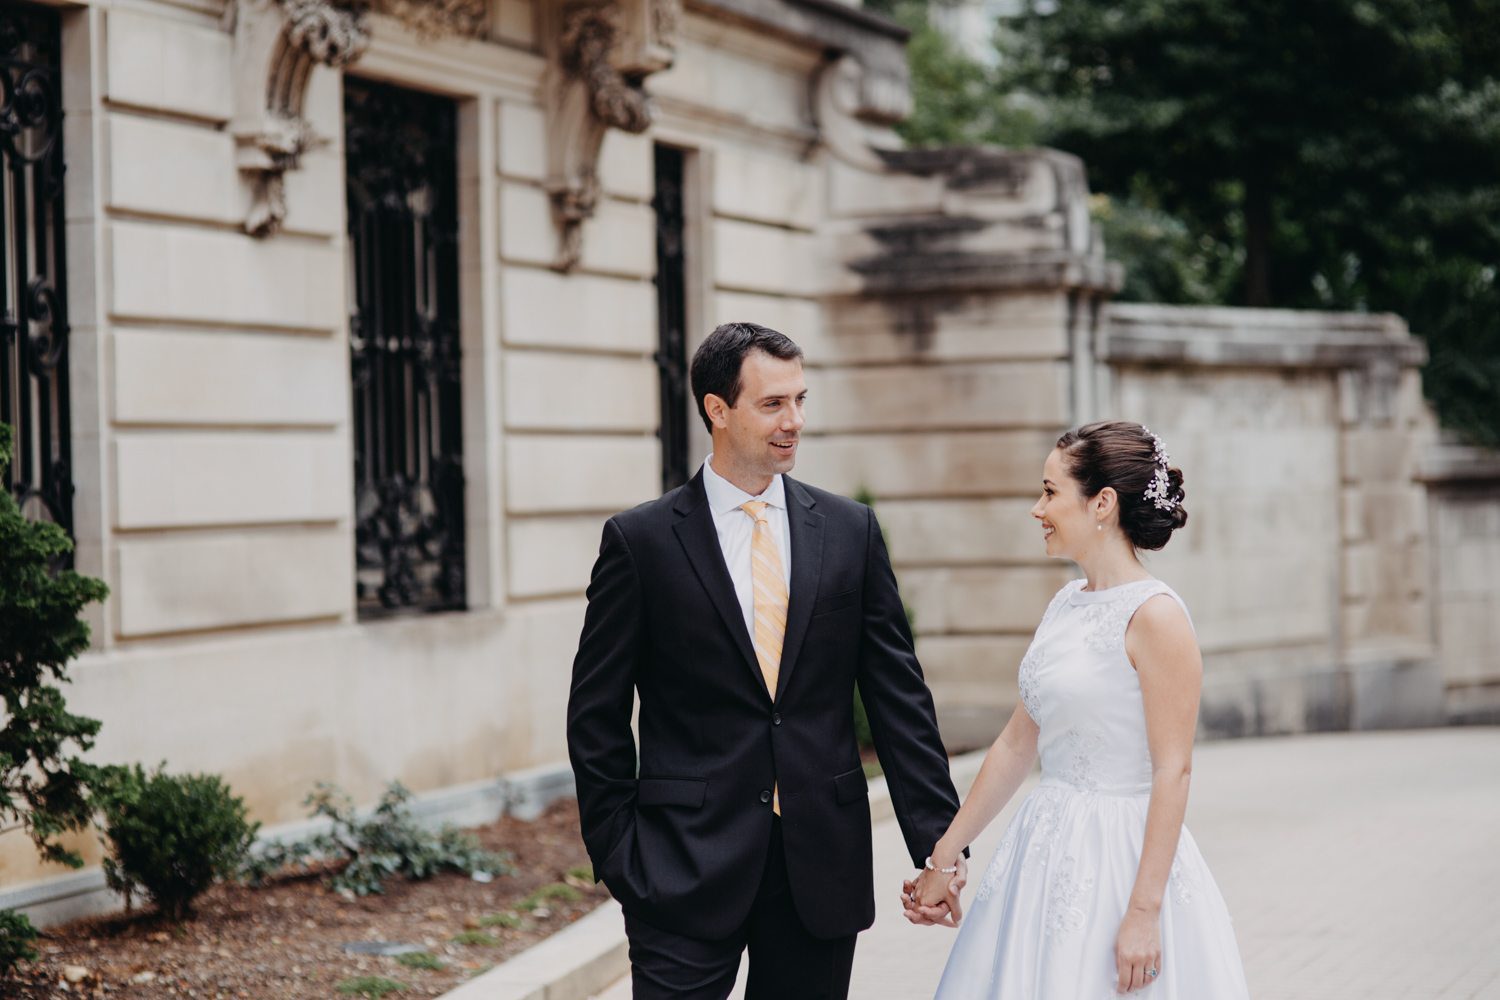 A bride and groom holding hands in front of the Cosmos Club in Washington DC for their Dupont Circle wedding.